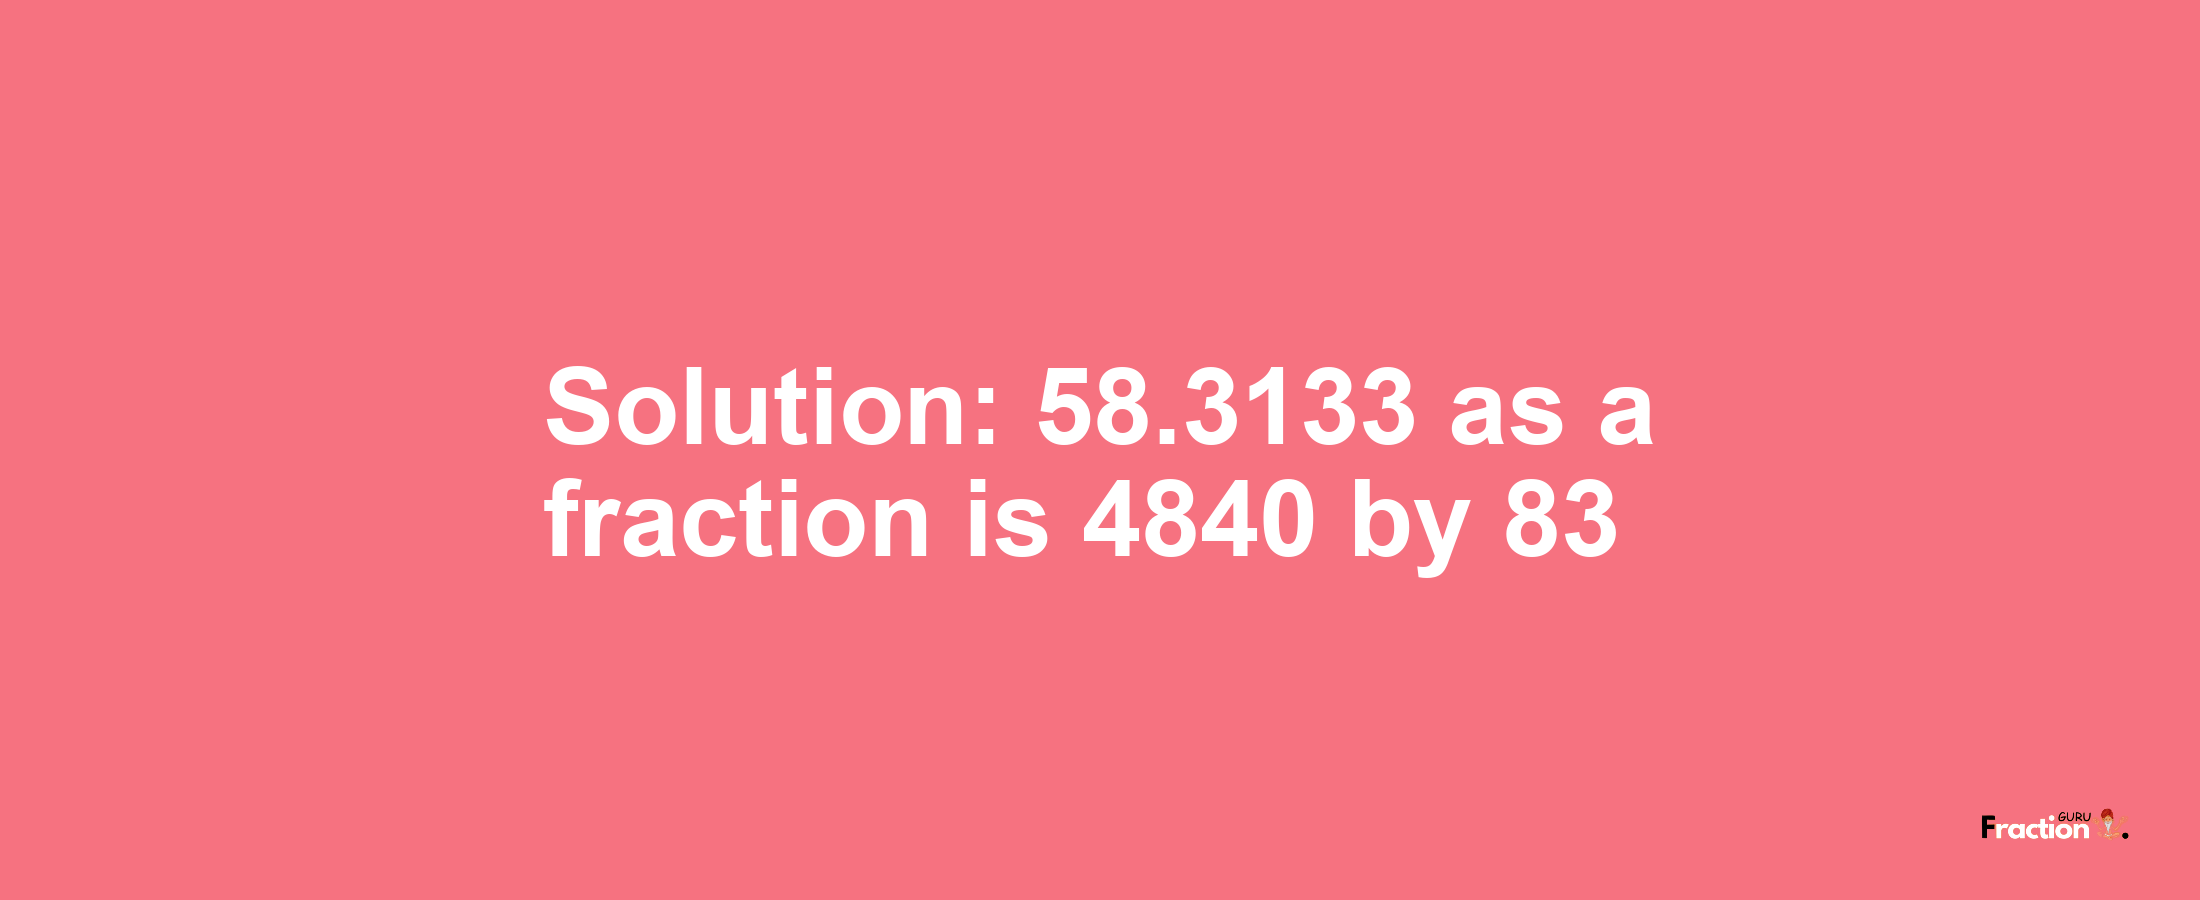 Solution:58.3133 as a fraction is 4840/83